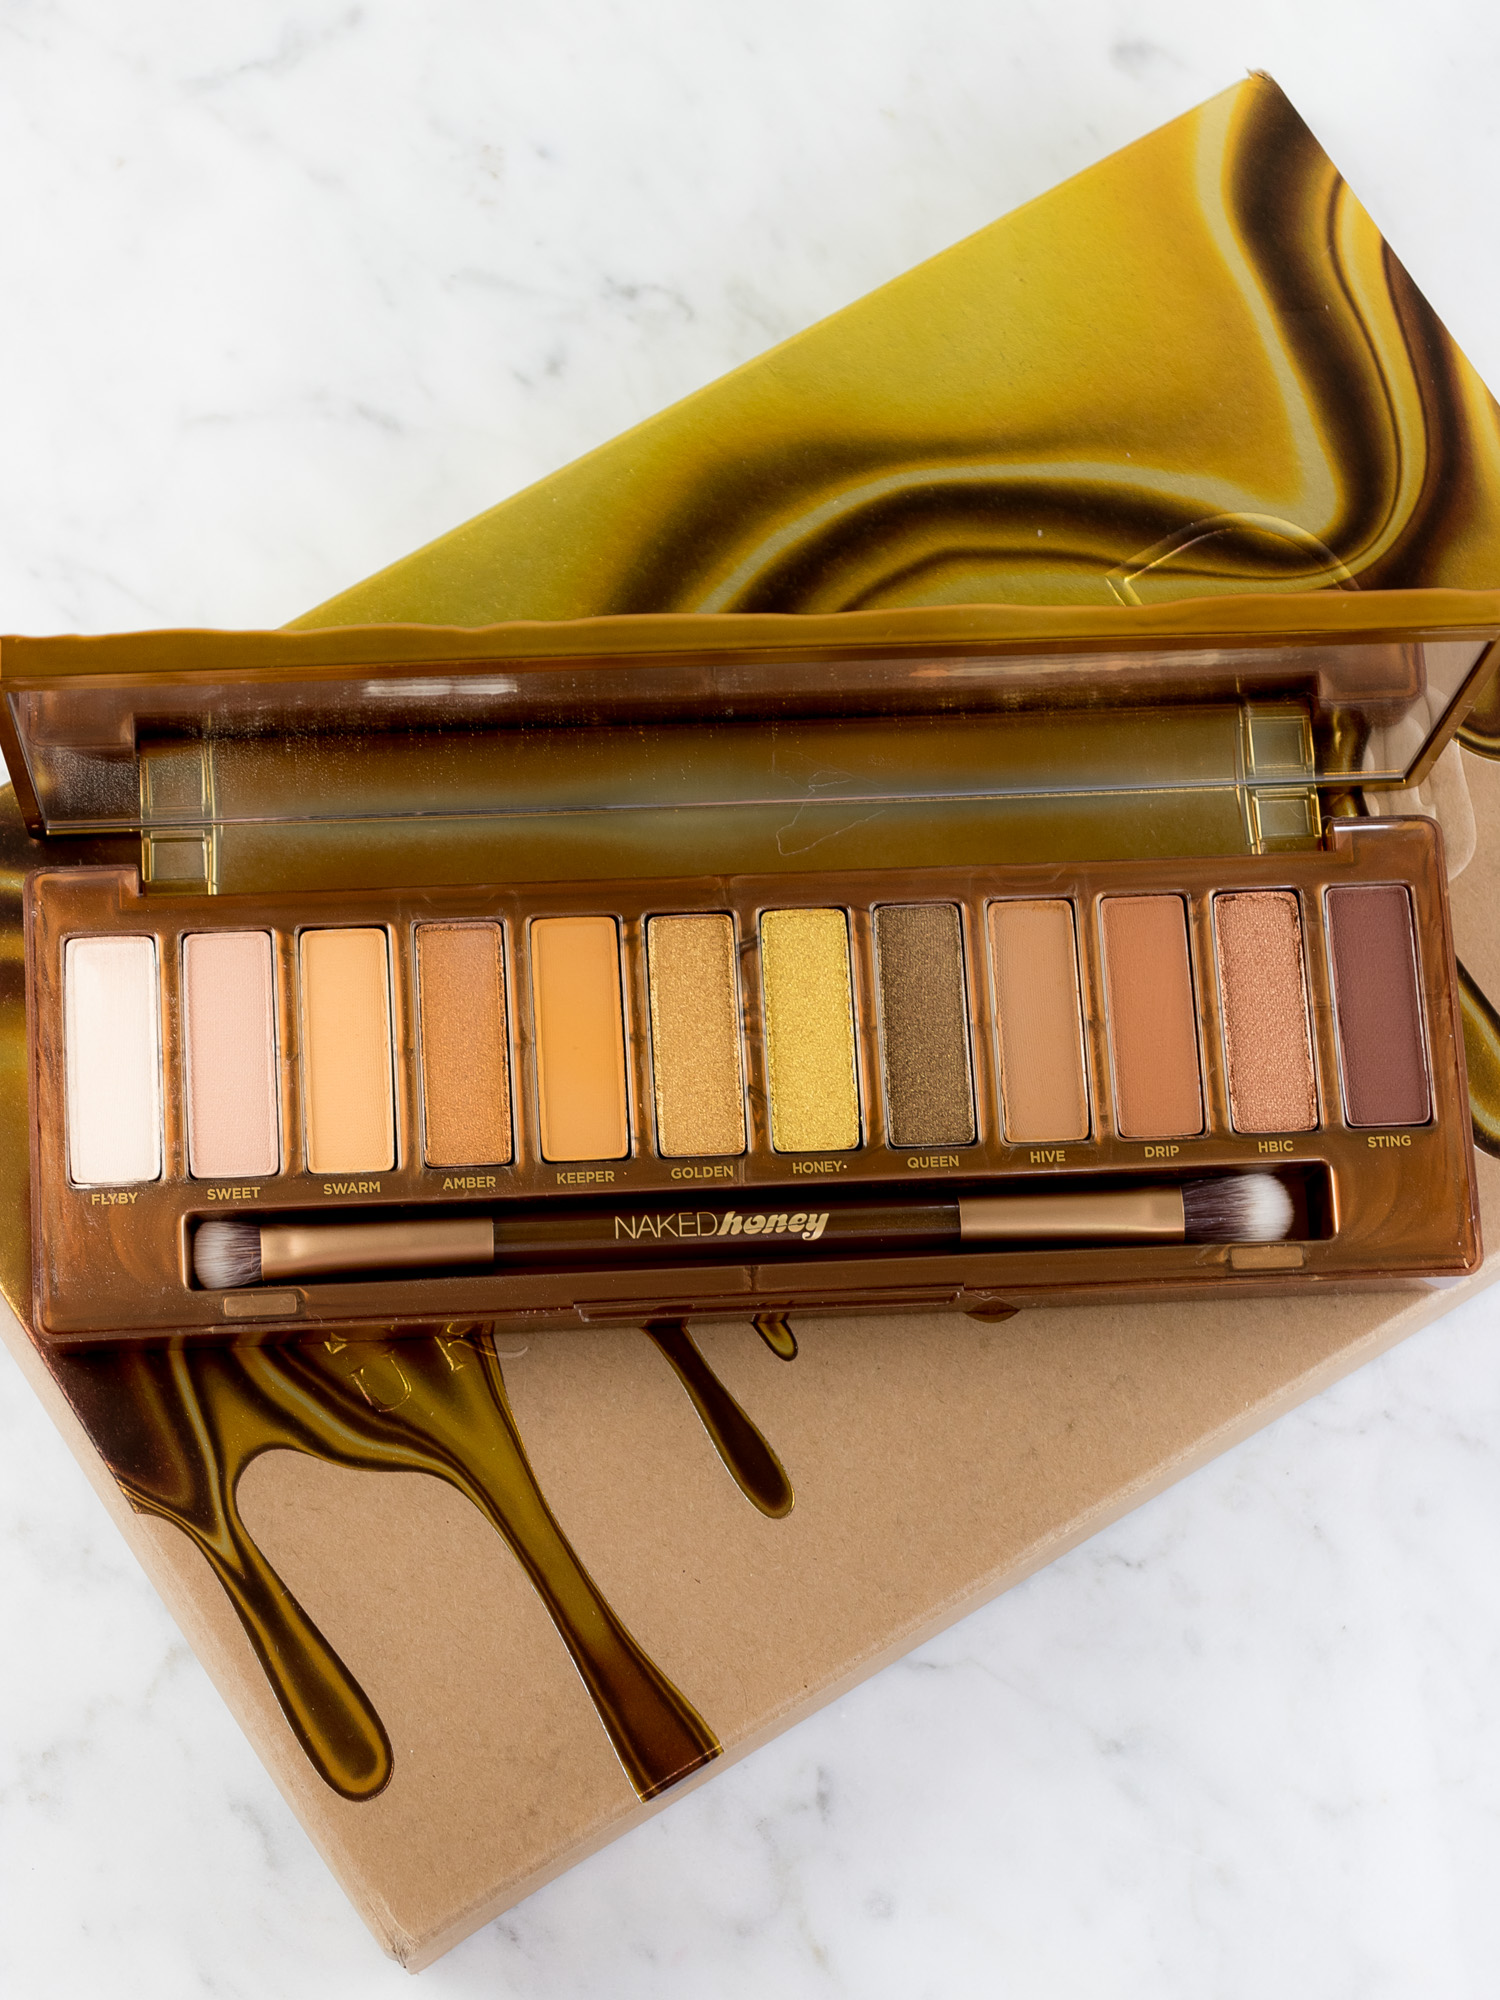 Urban Decay Launches NAKED Honey Eyeshadow Palette - Essence